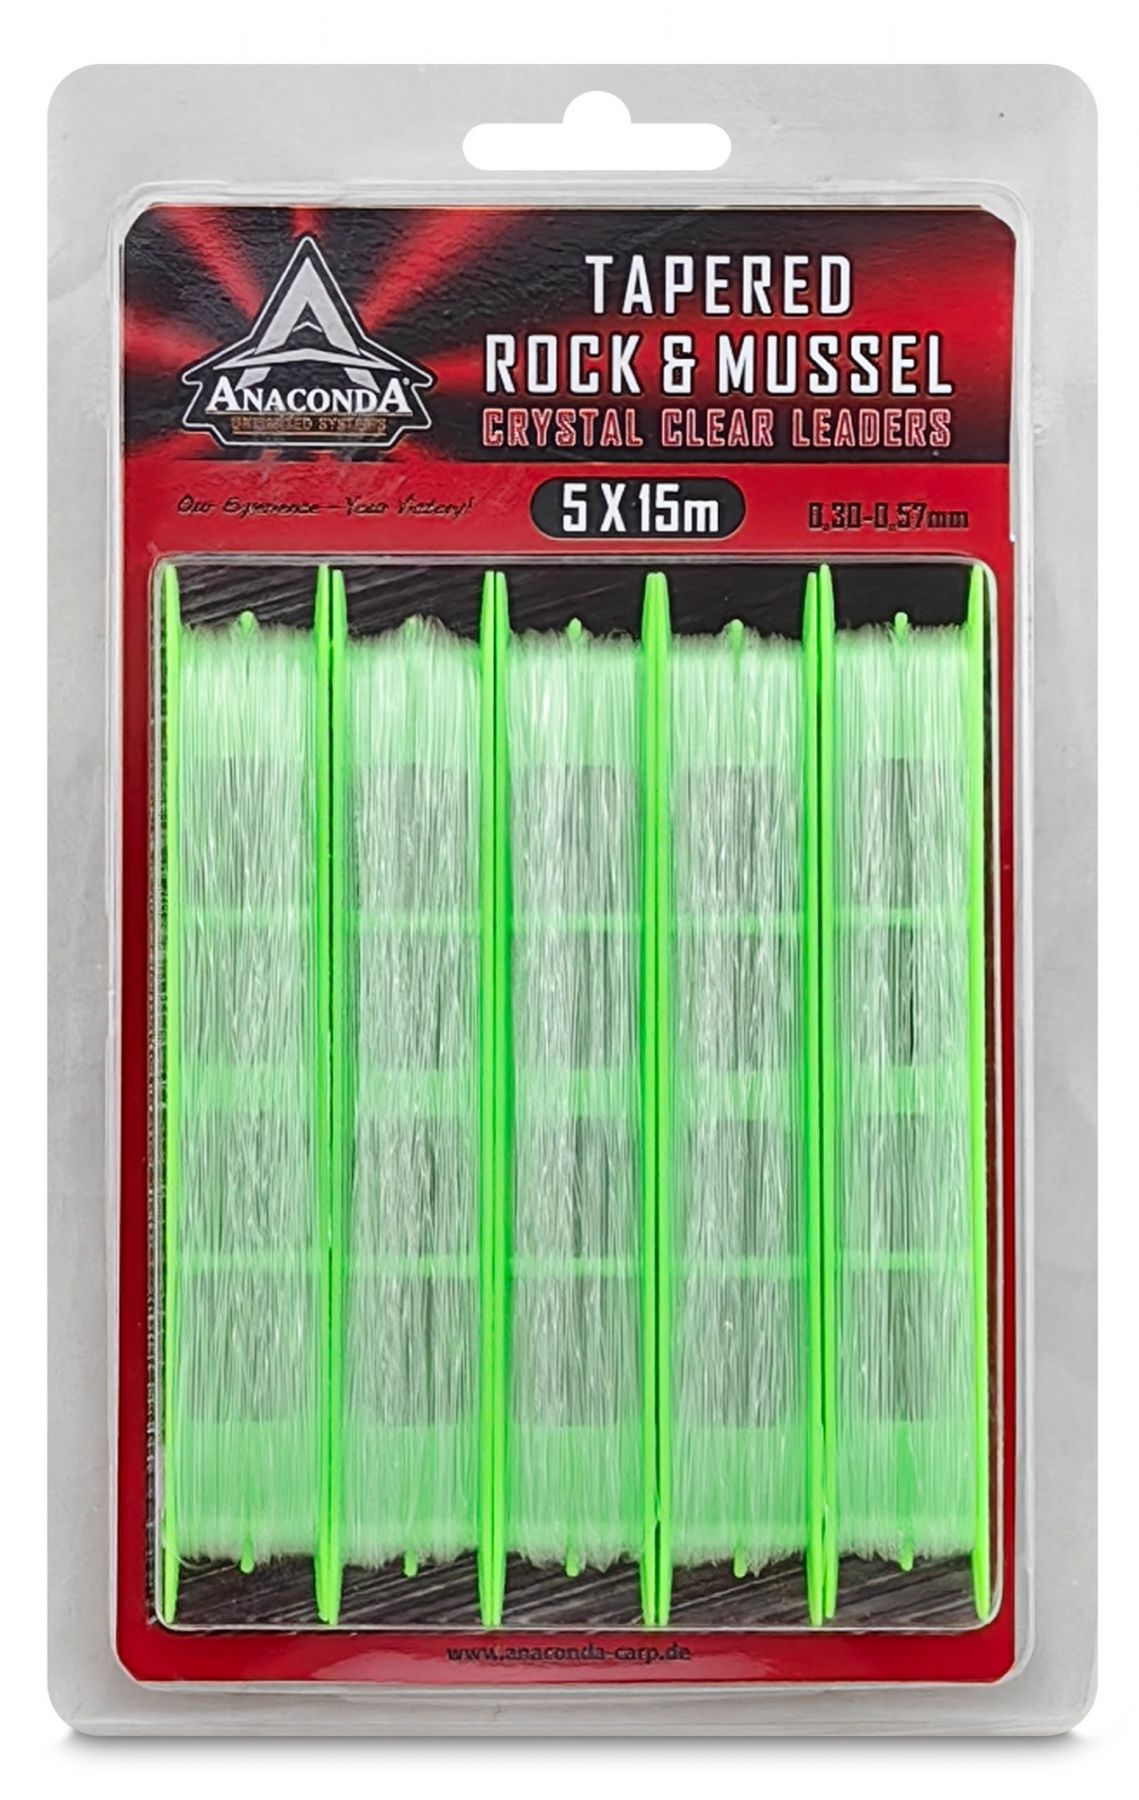 Anaconda Tapered Rock & Mussel Invisible Leaders 15m (5 pcs)